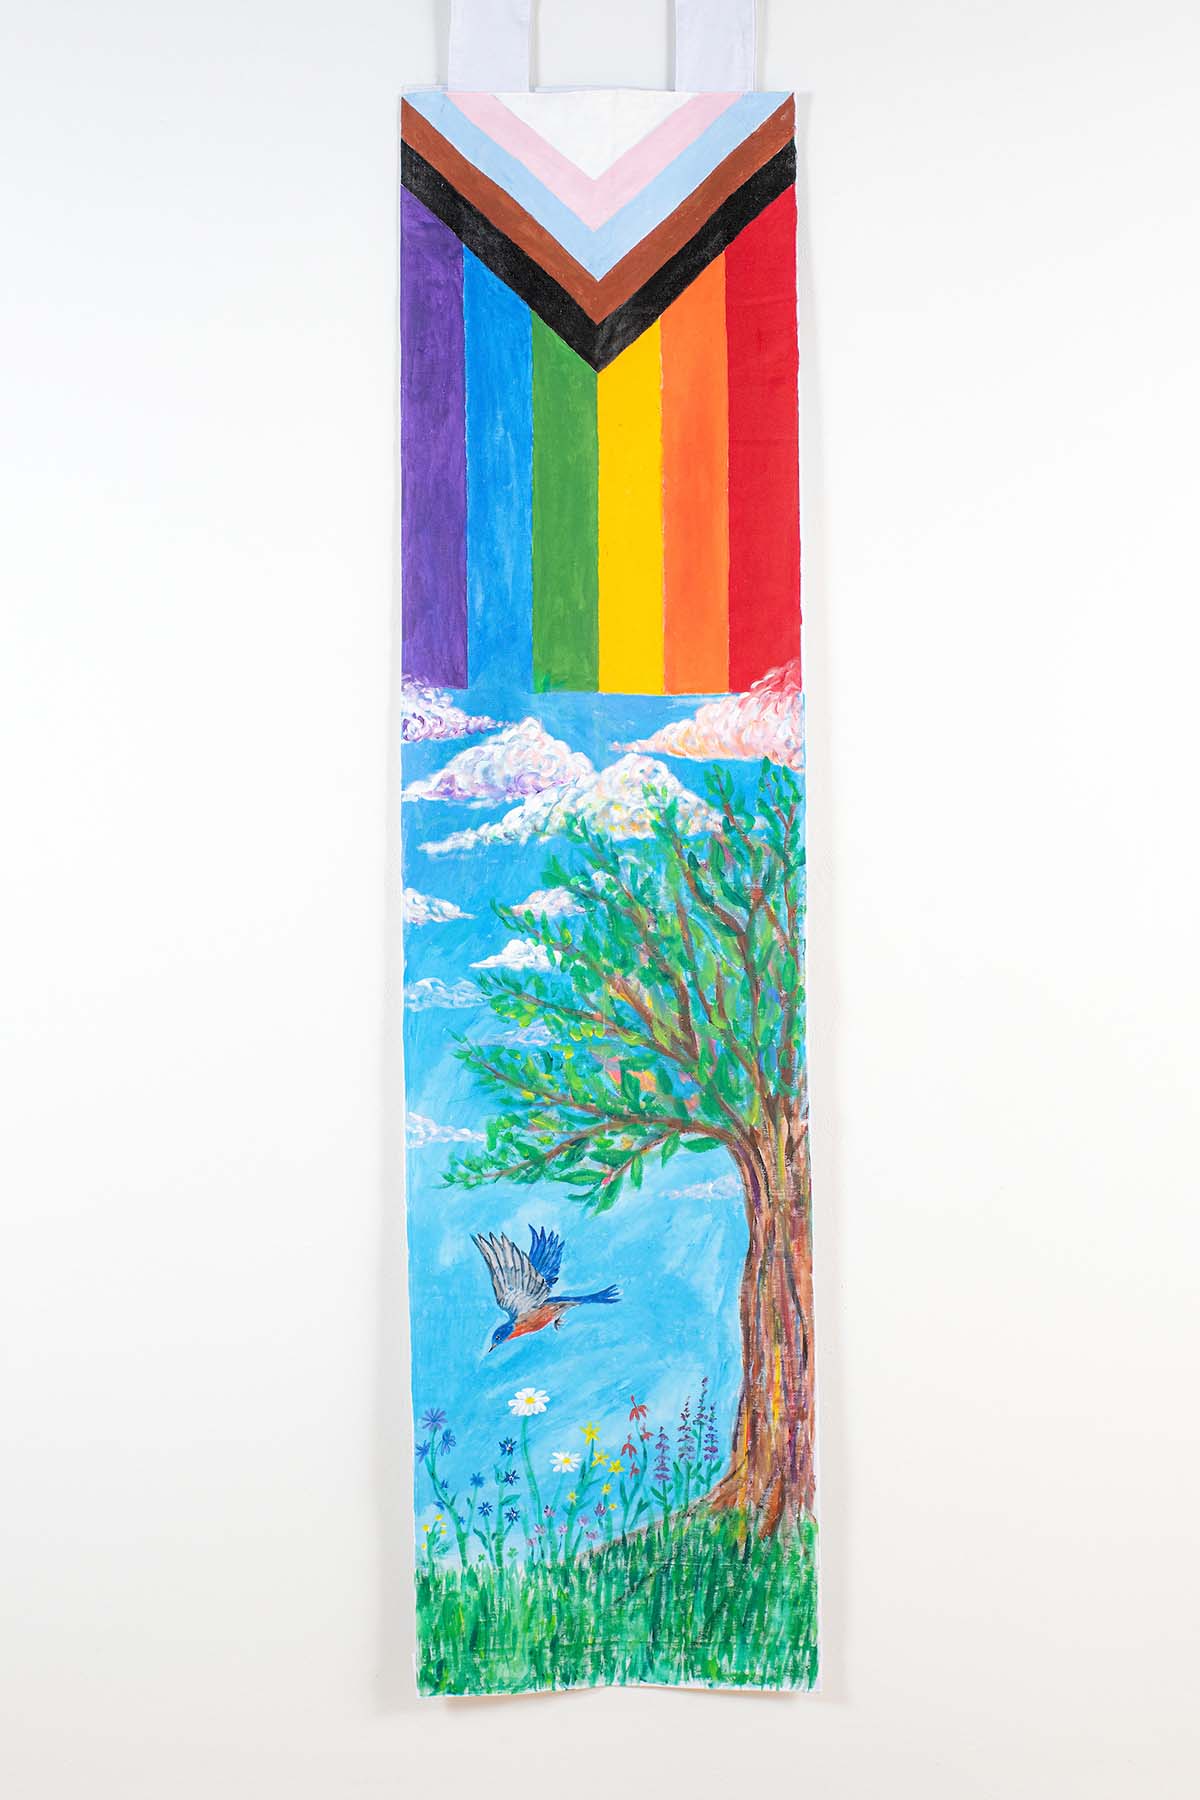 Photo of an art piece depicting a vertical rainbow block atop a dreamy blue sky and a blue bird diving down past flowers from a blooming tree